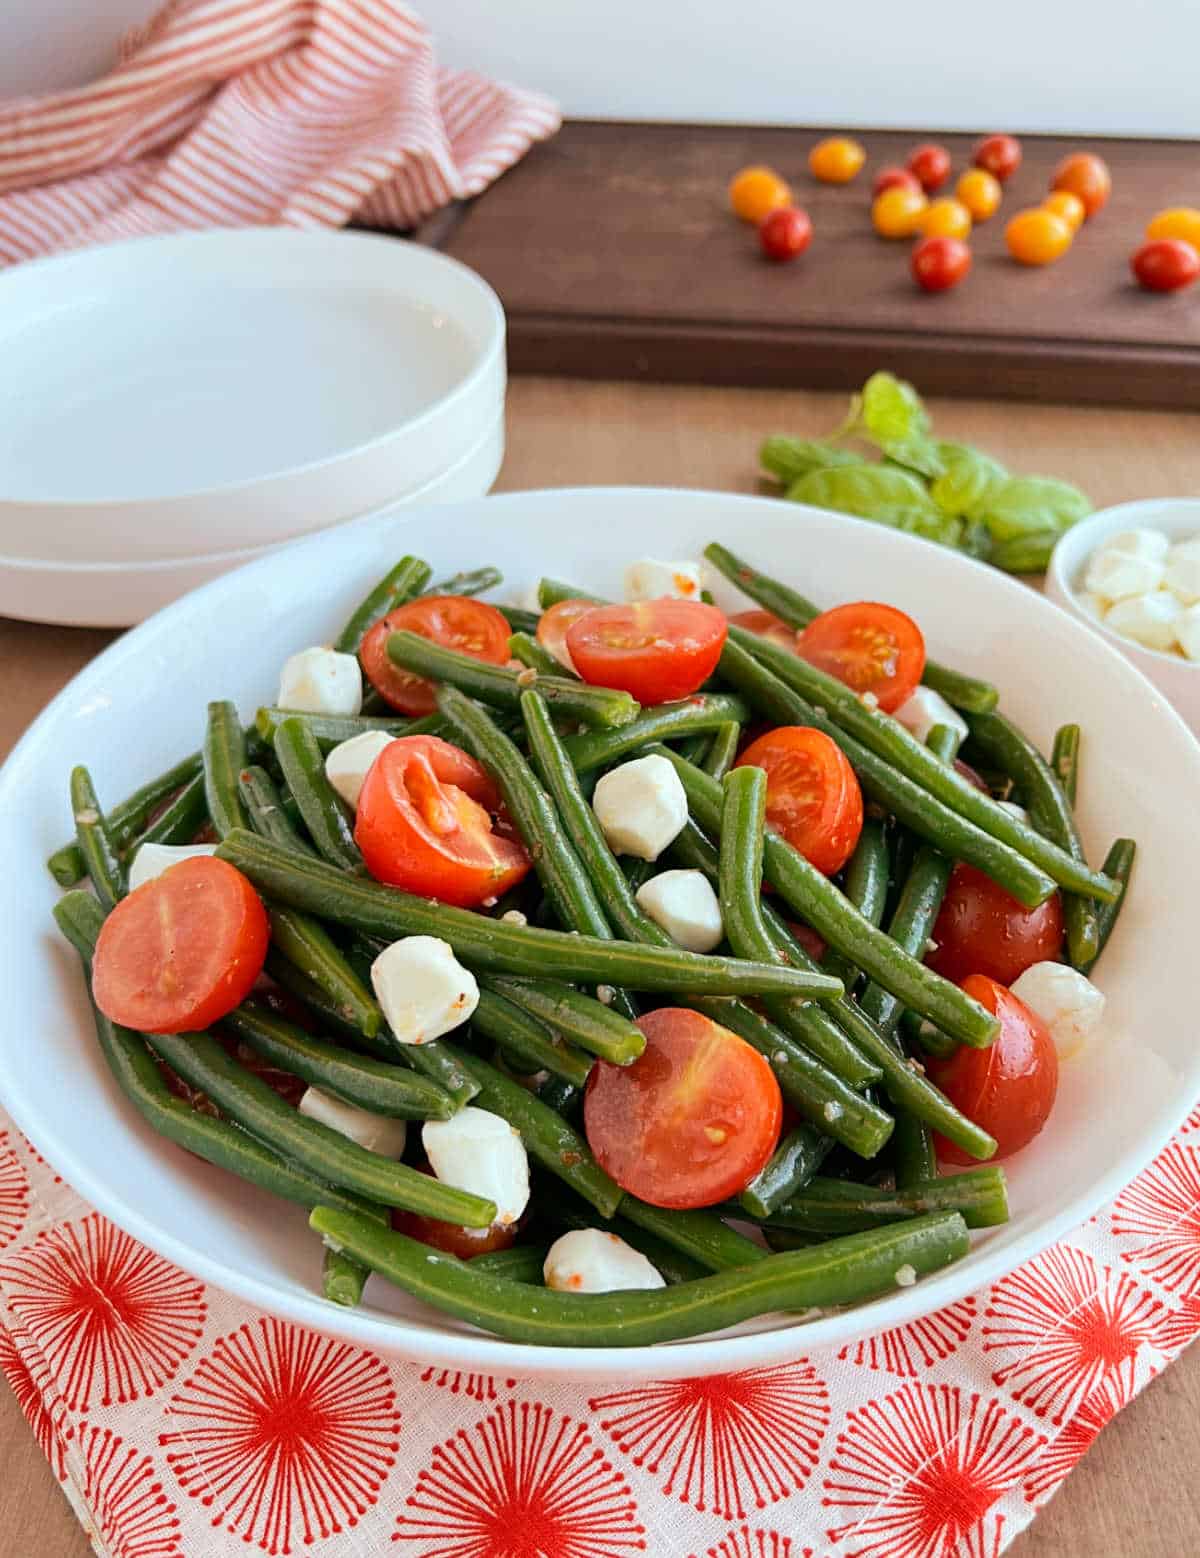 green bean salad with tomatoes and mozzarella on table.